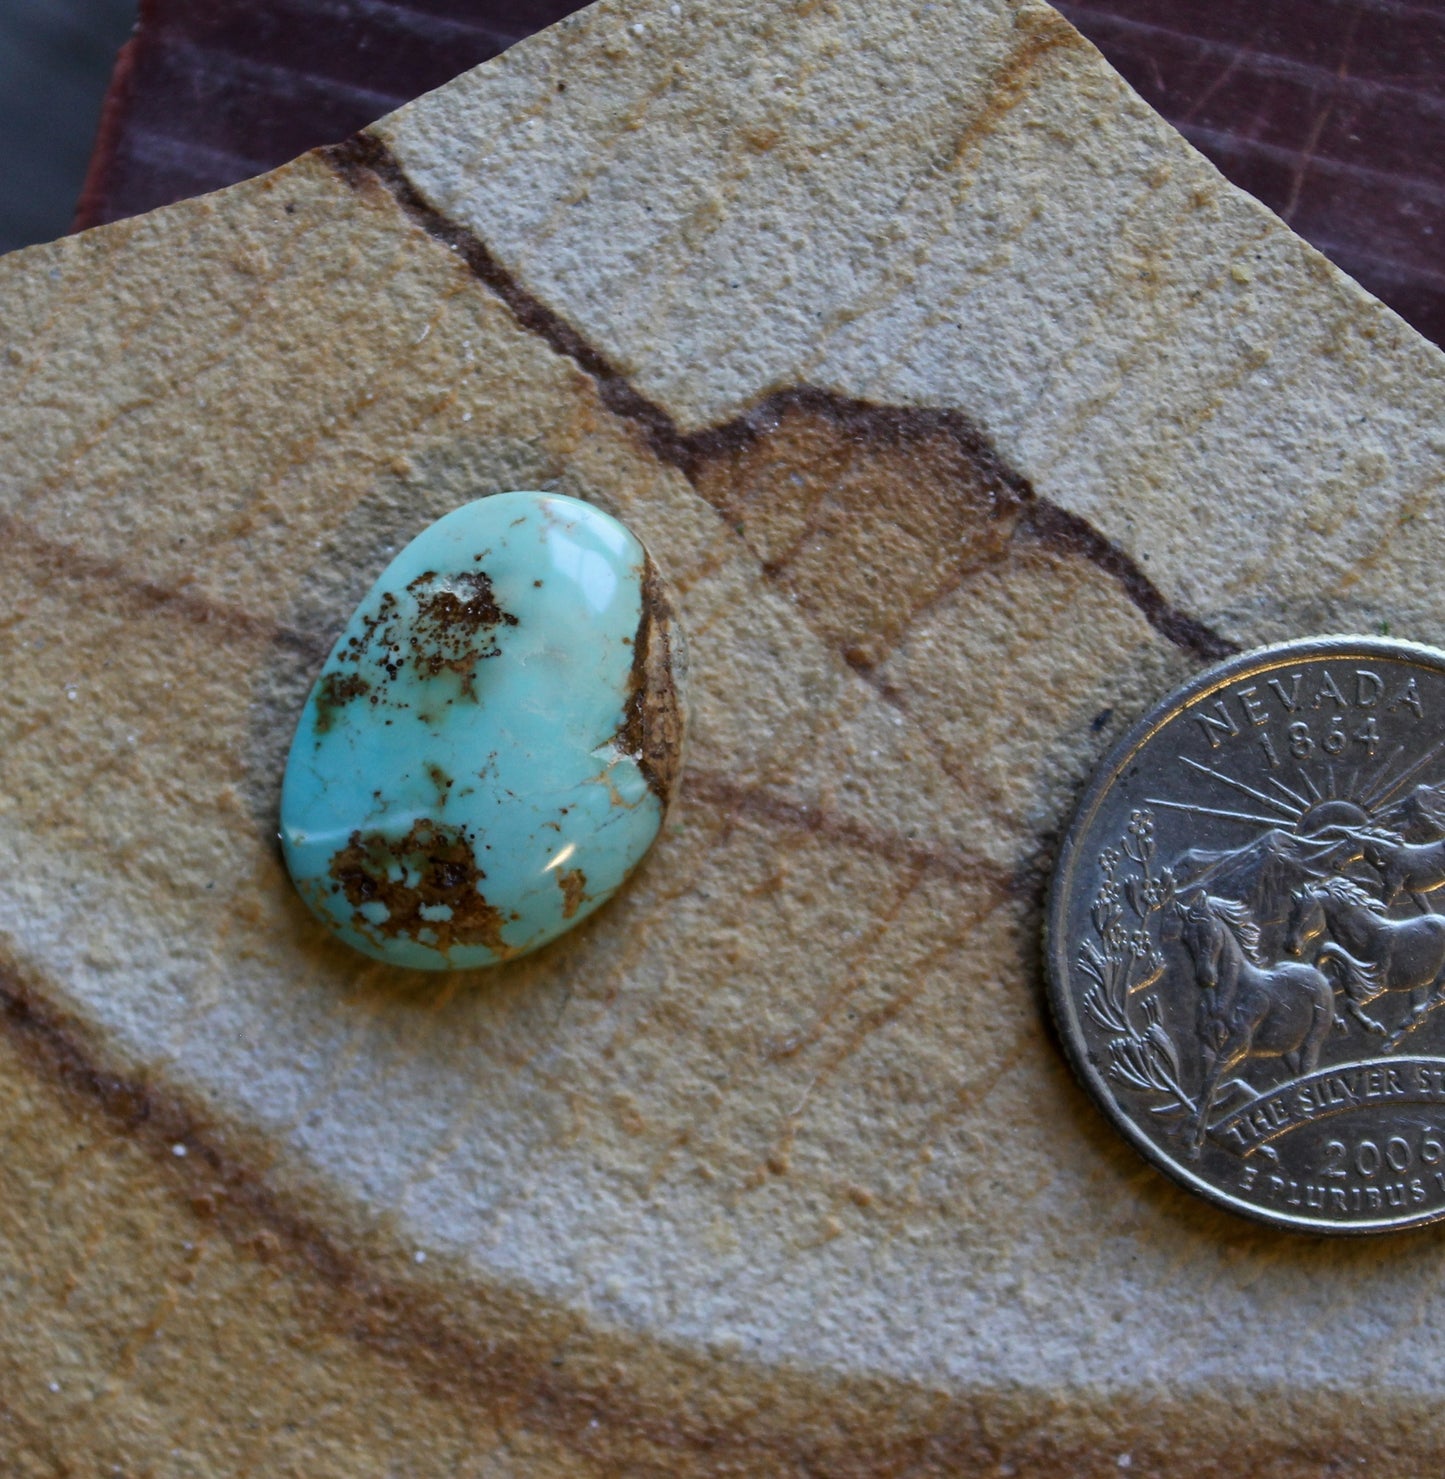 10 carat light blue Stone Mountain Turquoise cabochon with red matrix